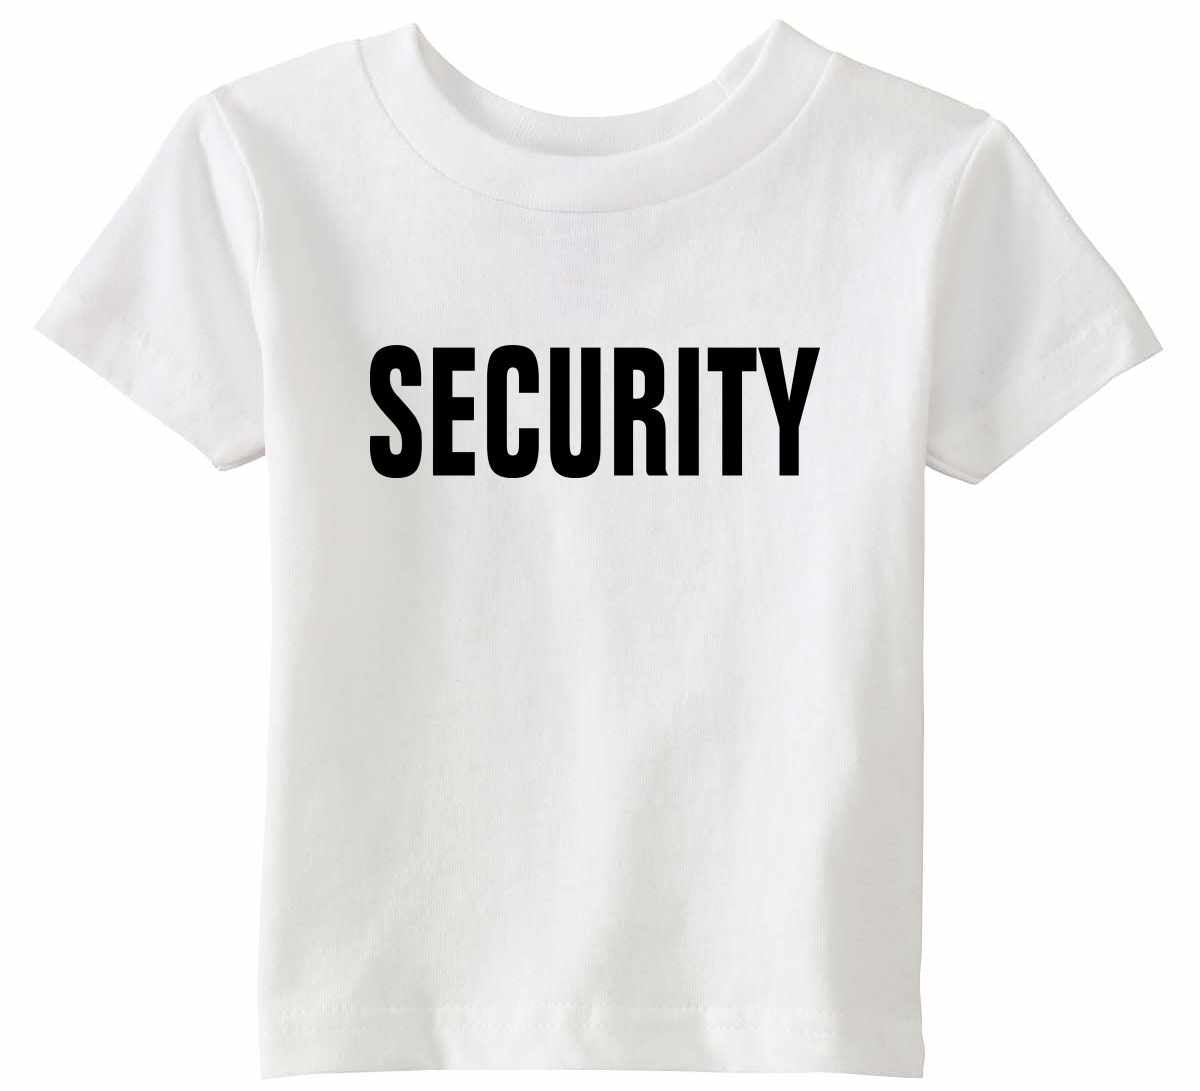 SECURITY on Infant-Toddler T-Shirt (#58-7)